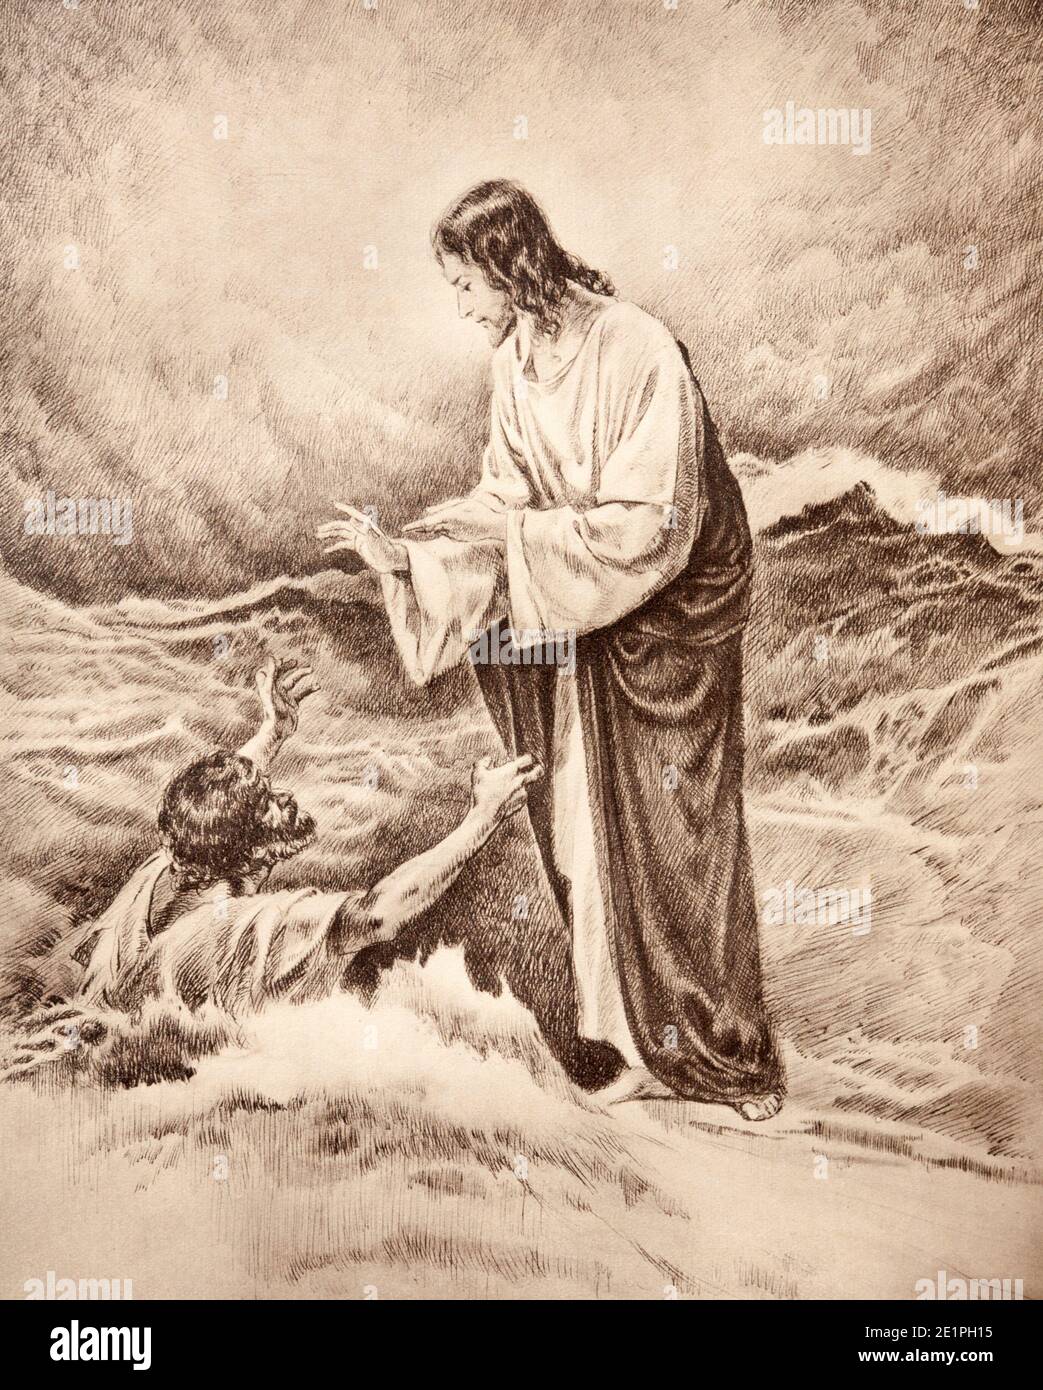 SEBECHLEBY, SLOVAKIA - SEPTEMBER 24, 2011: The lithography of Miracle fishing originaly by unknown artist. Stock Photo